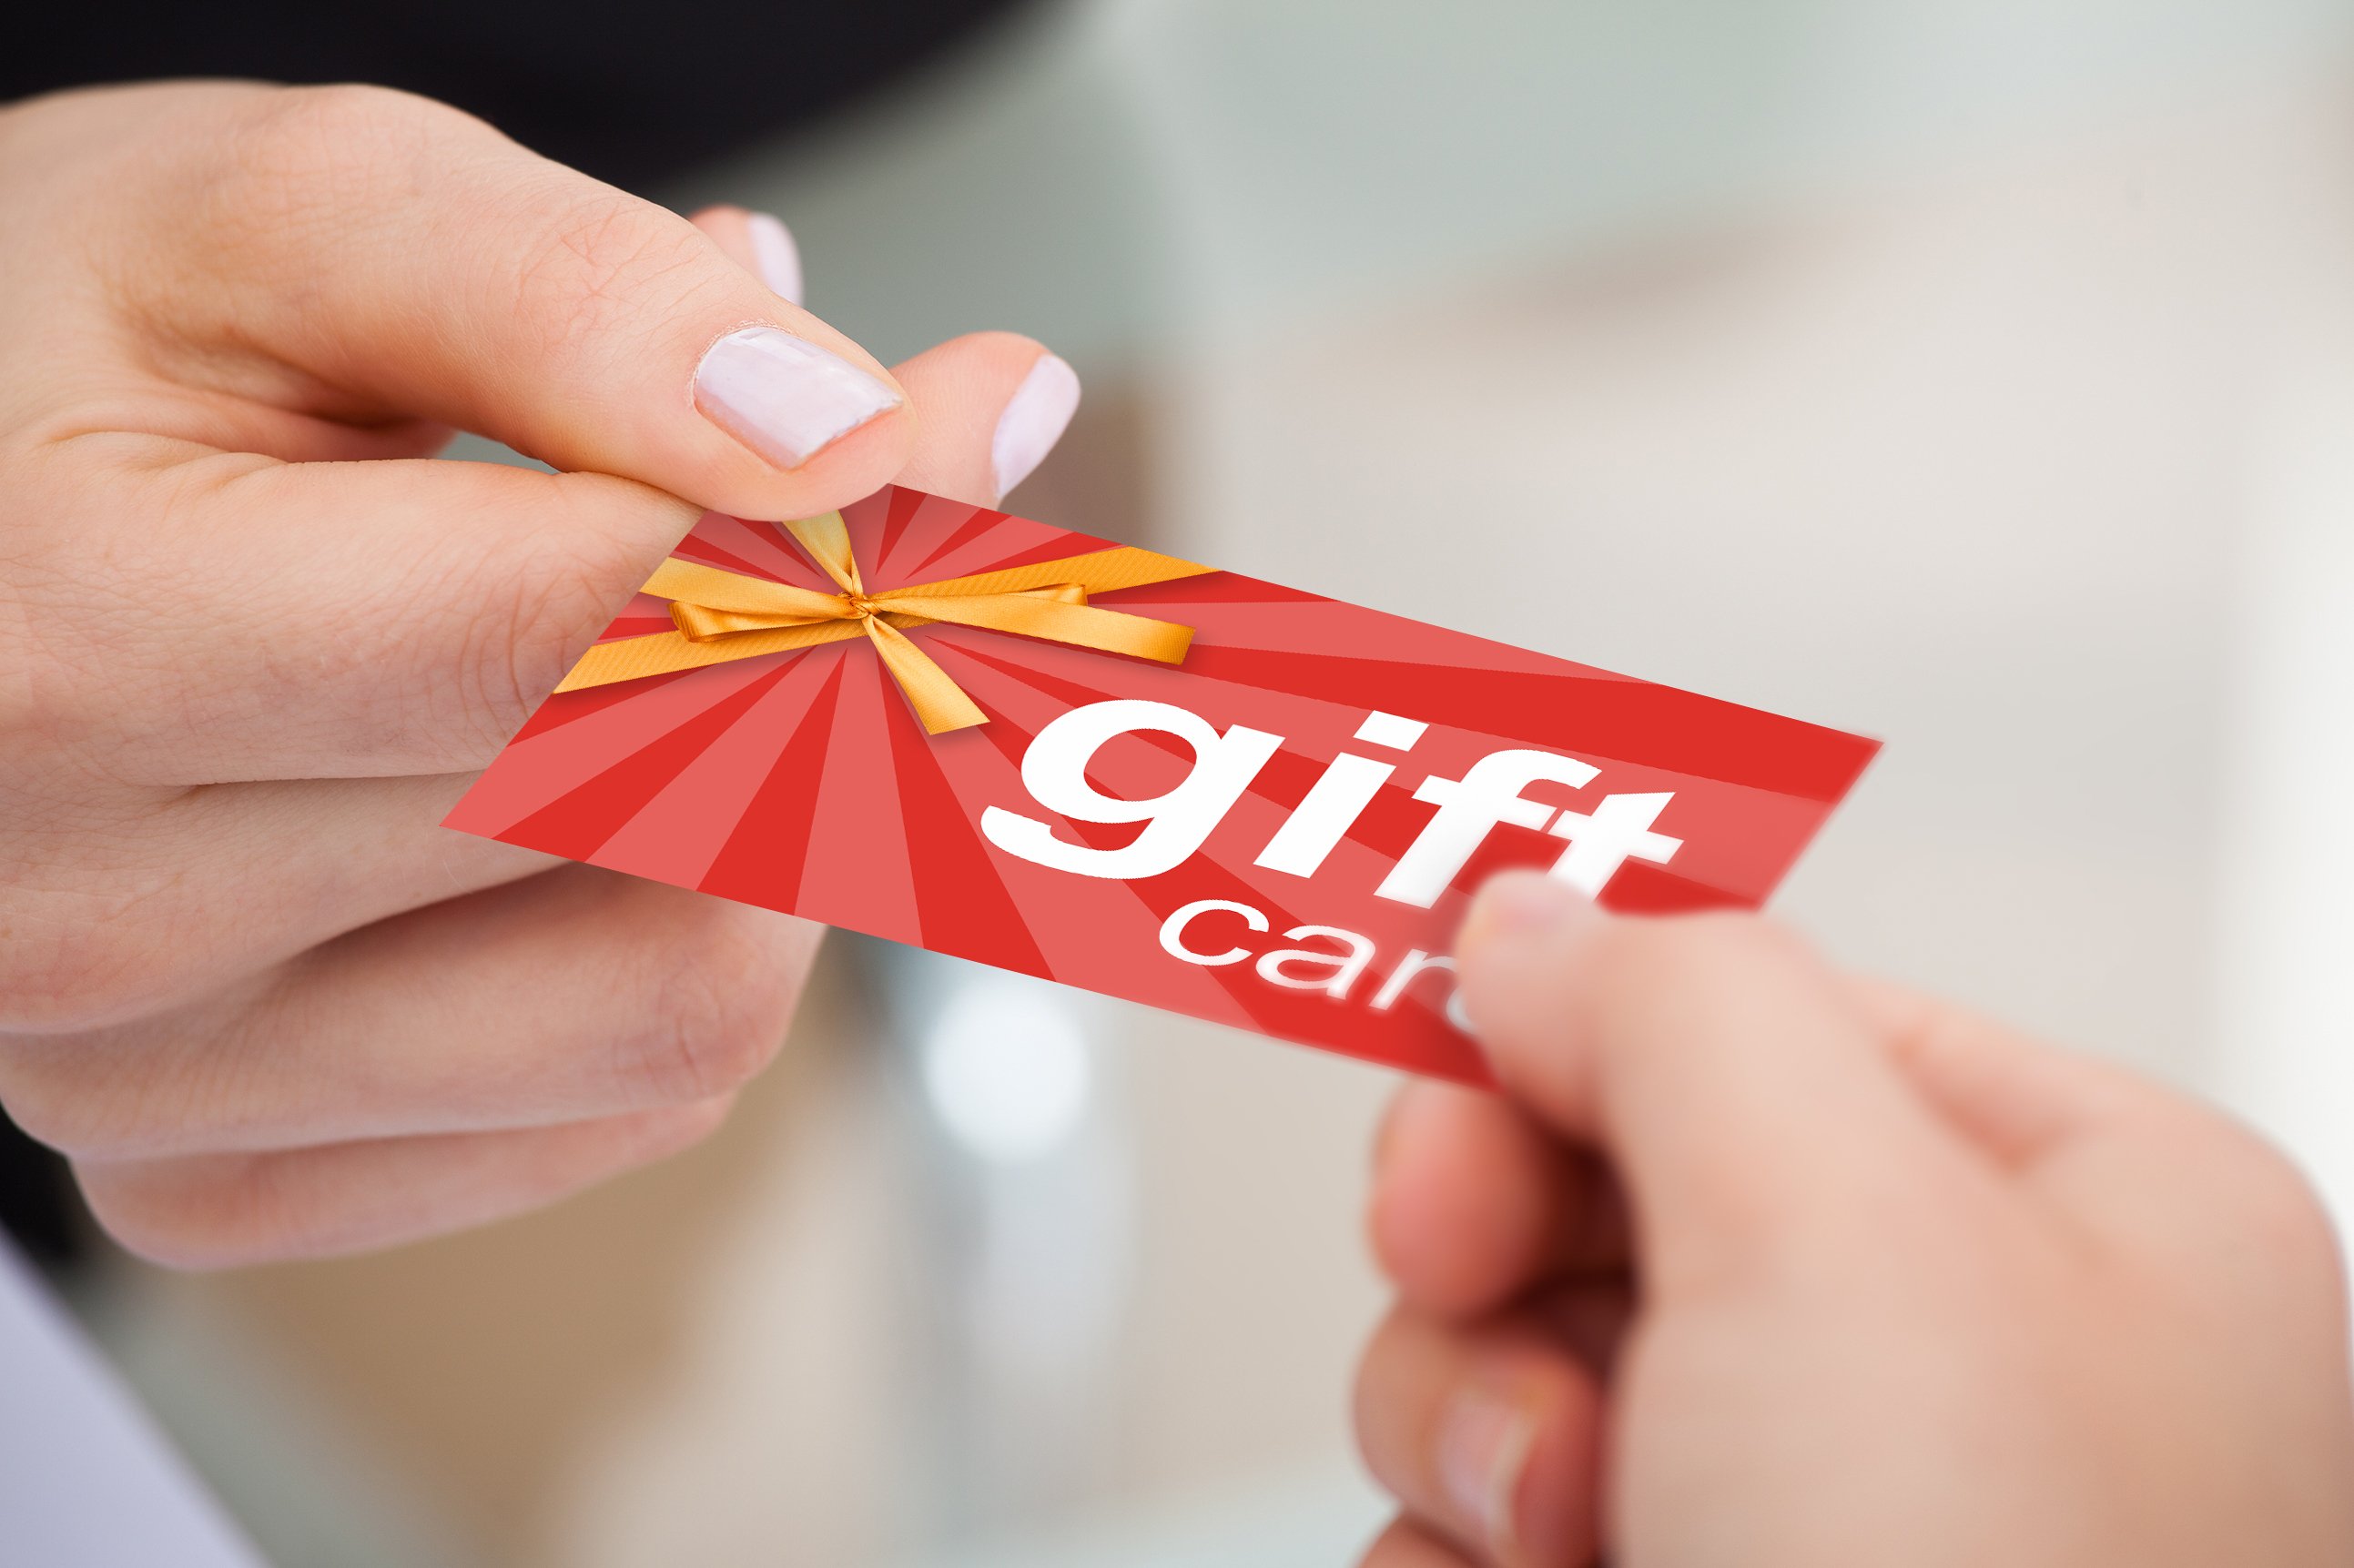 The Card Network  Gift Cards With Popular Brands